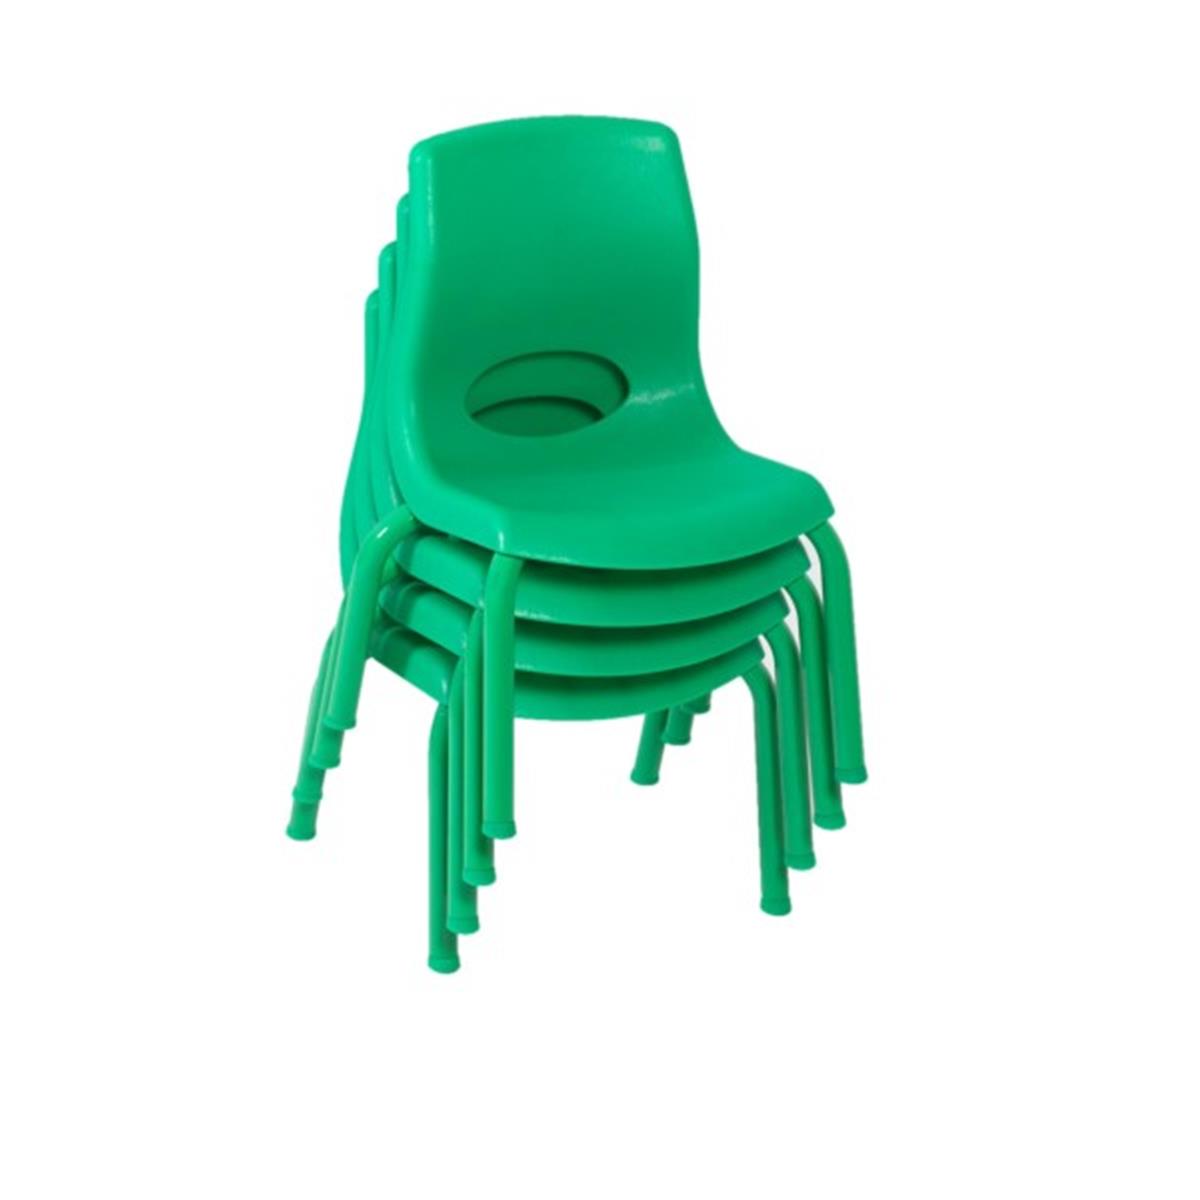 Ab8008pg4 8 In. Myposture Chair, Green - Pack Of 4